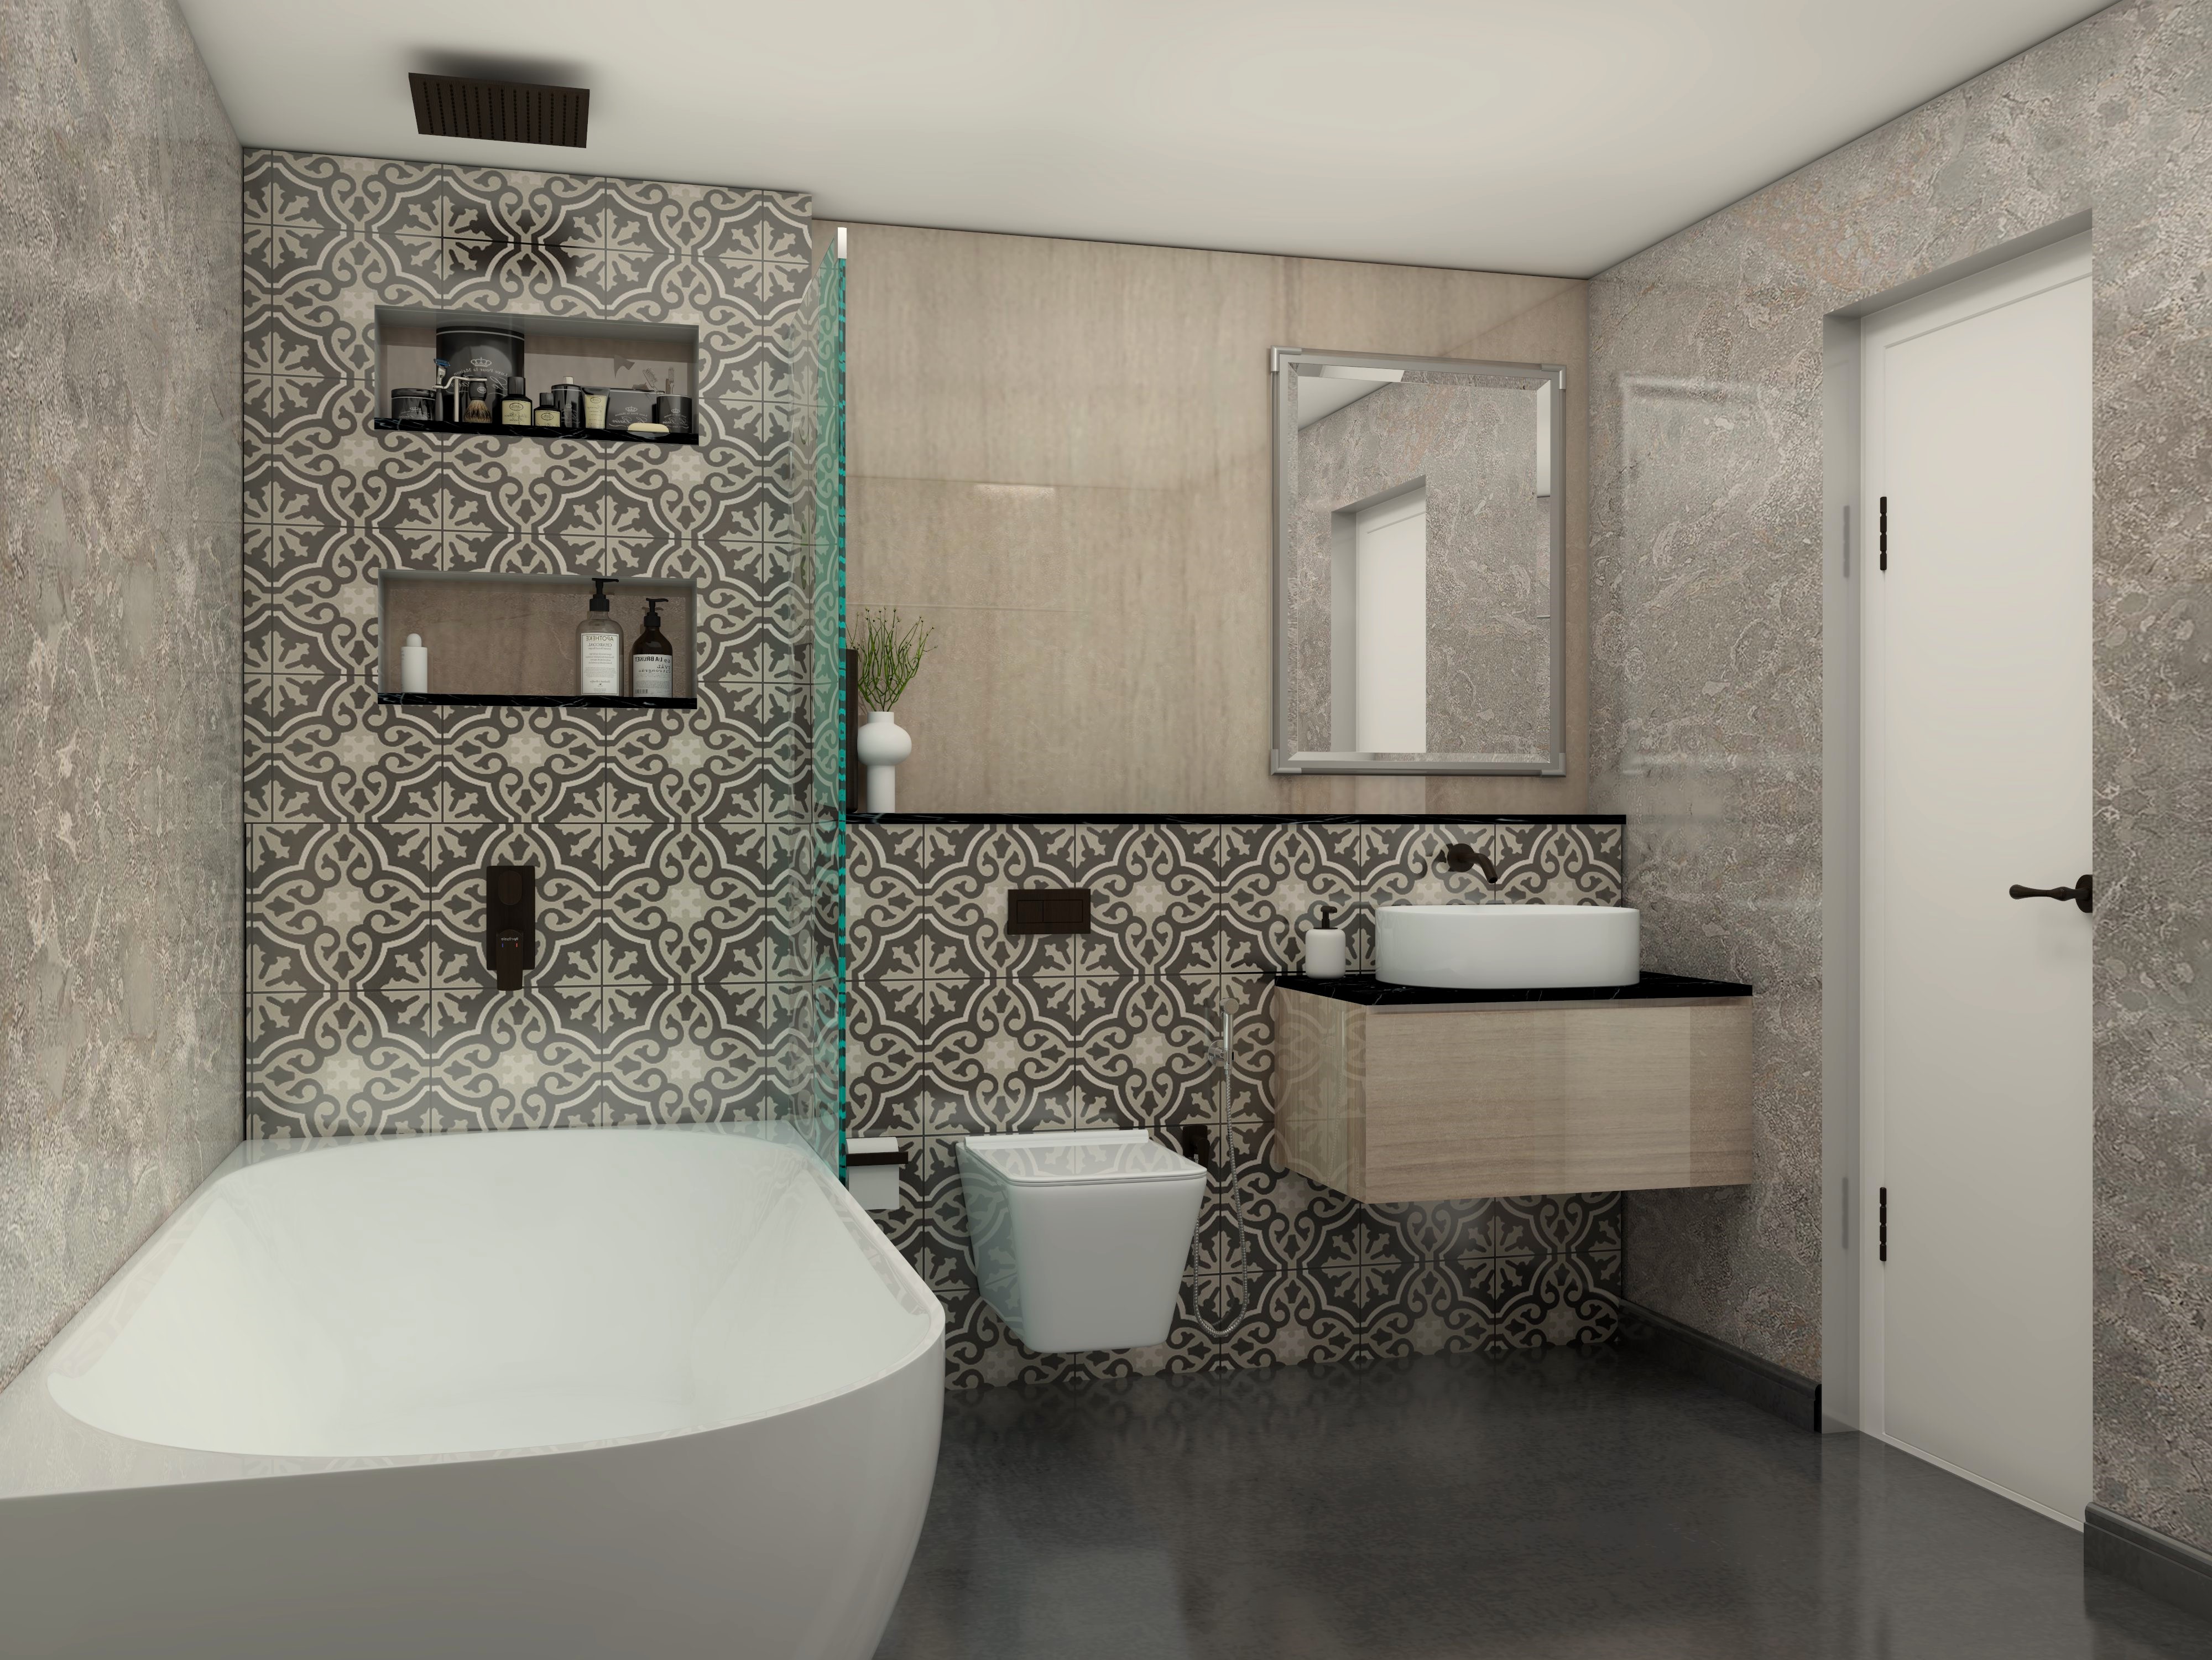 Modern bathroom with beige and brown printed tiles - Beautiful Homes